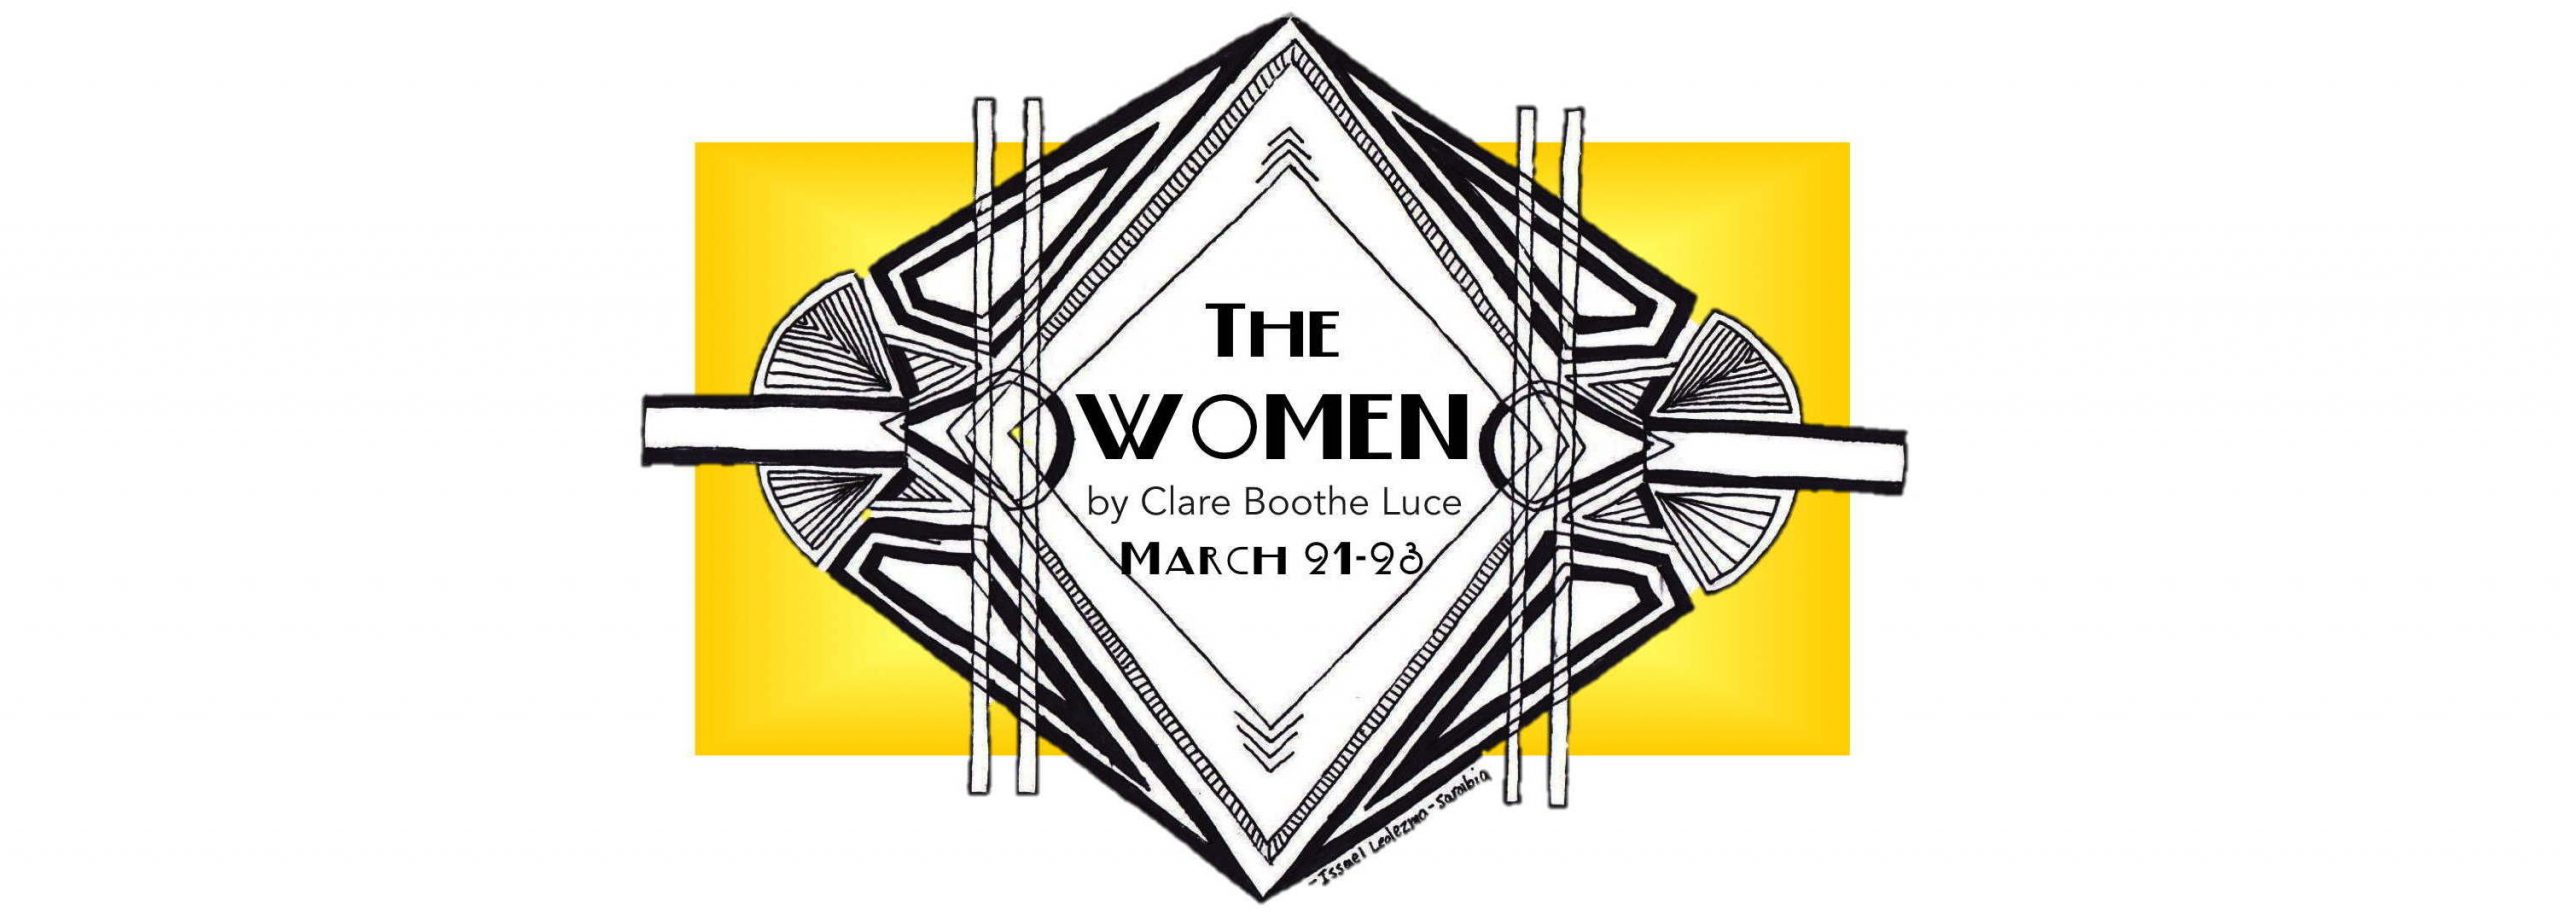 THE WOMEN — March 21-23, 2019